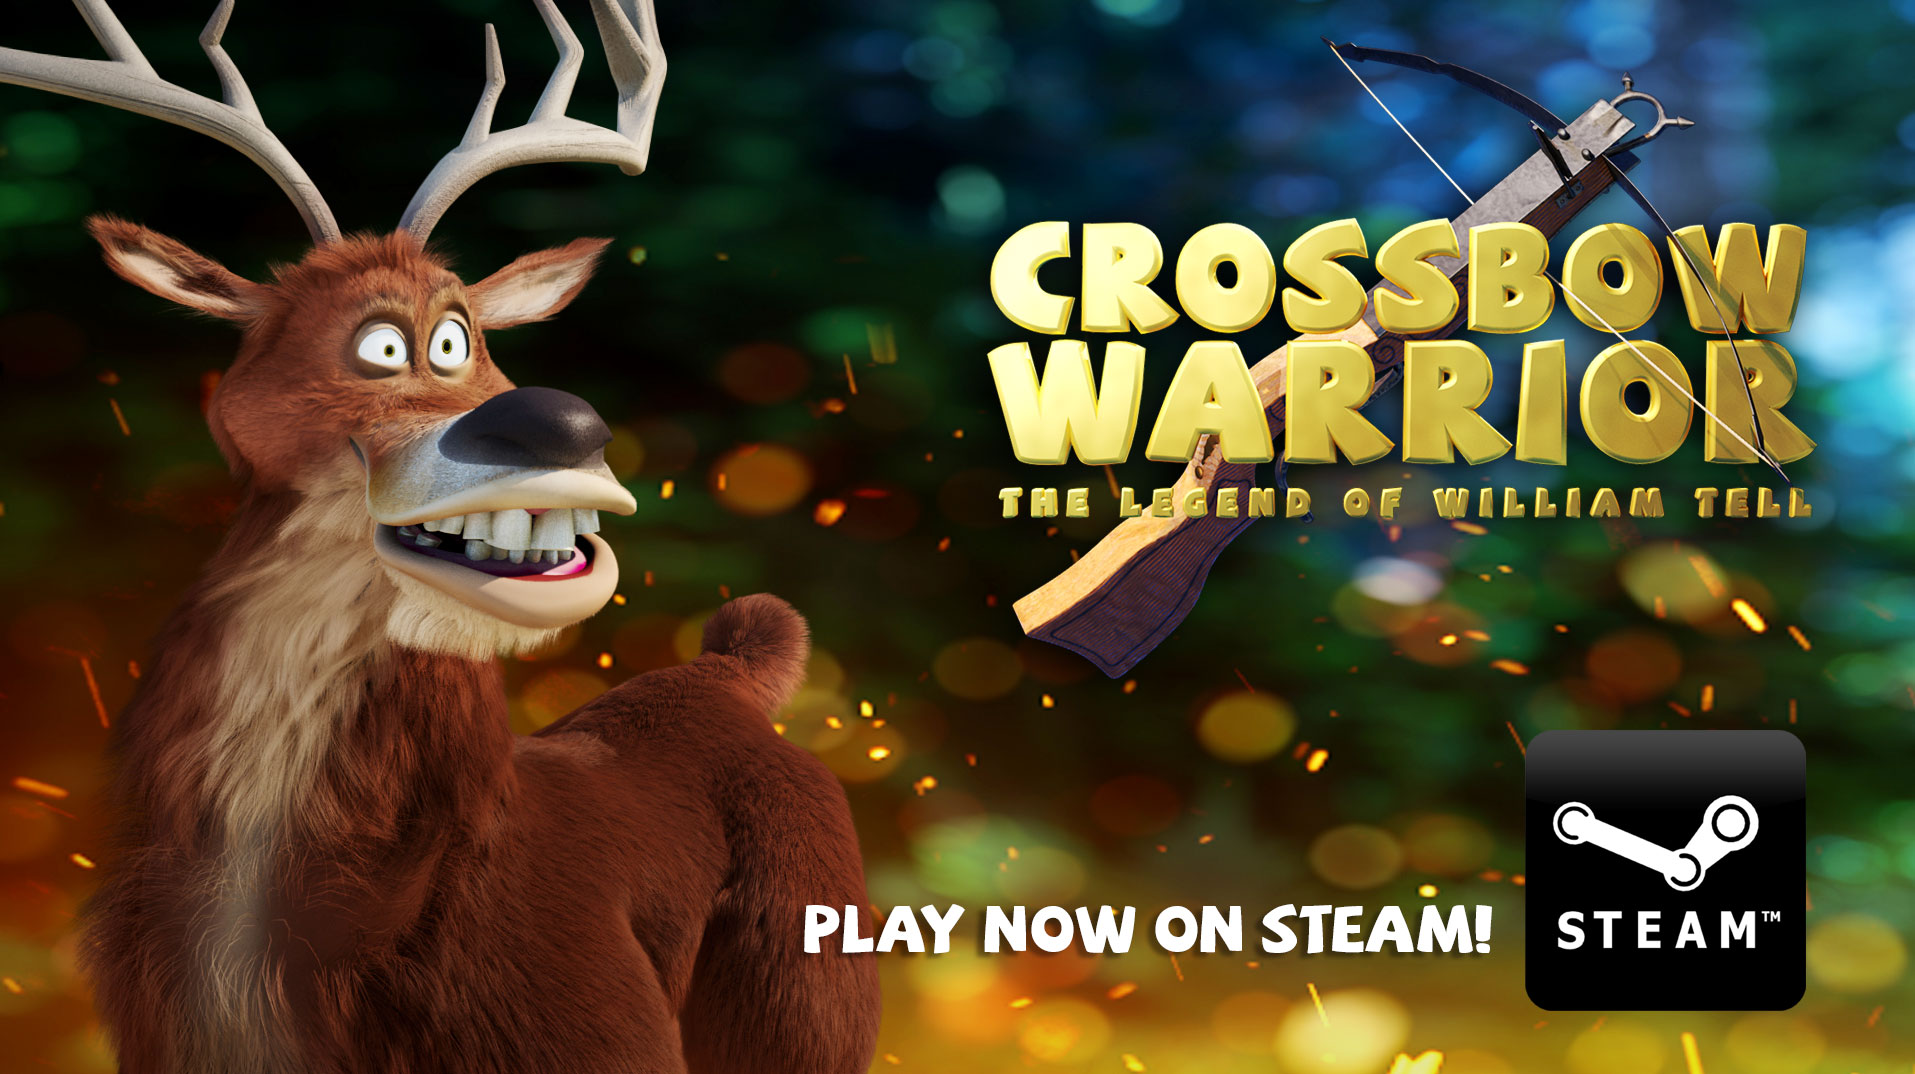 Crossbow Warrior - The Legend of William Tell PC system requirements